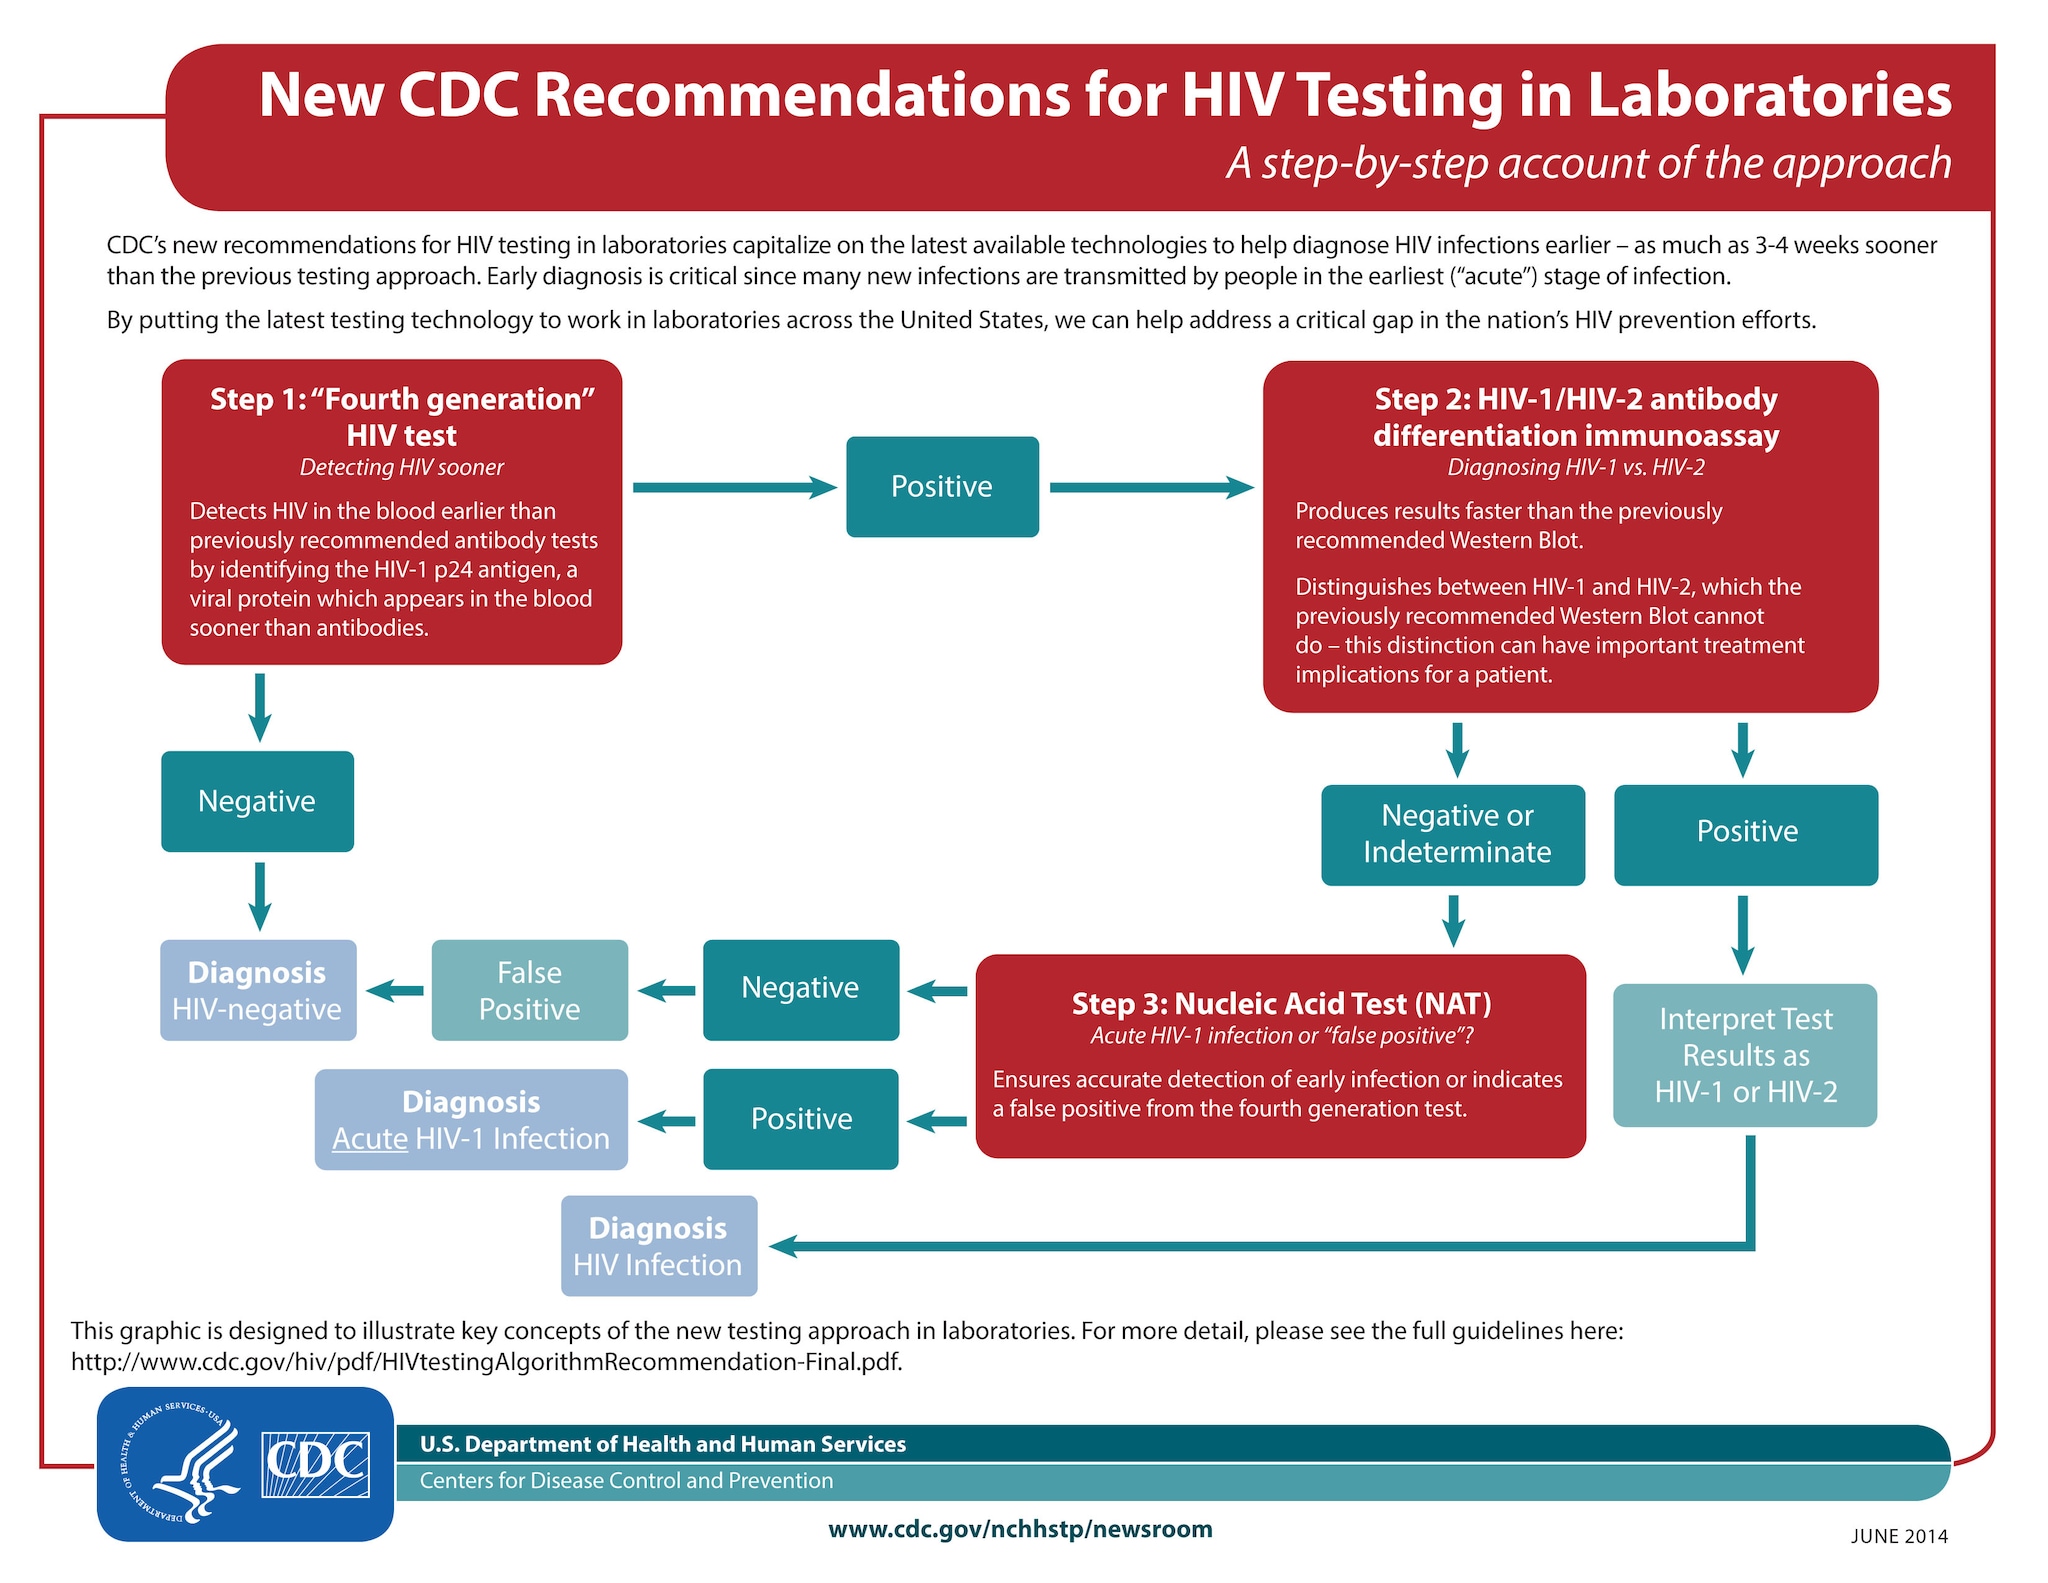 Cdc Recommends New Hiv Testing Approach In Labs 2014 Newsroom